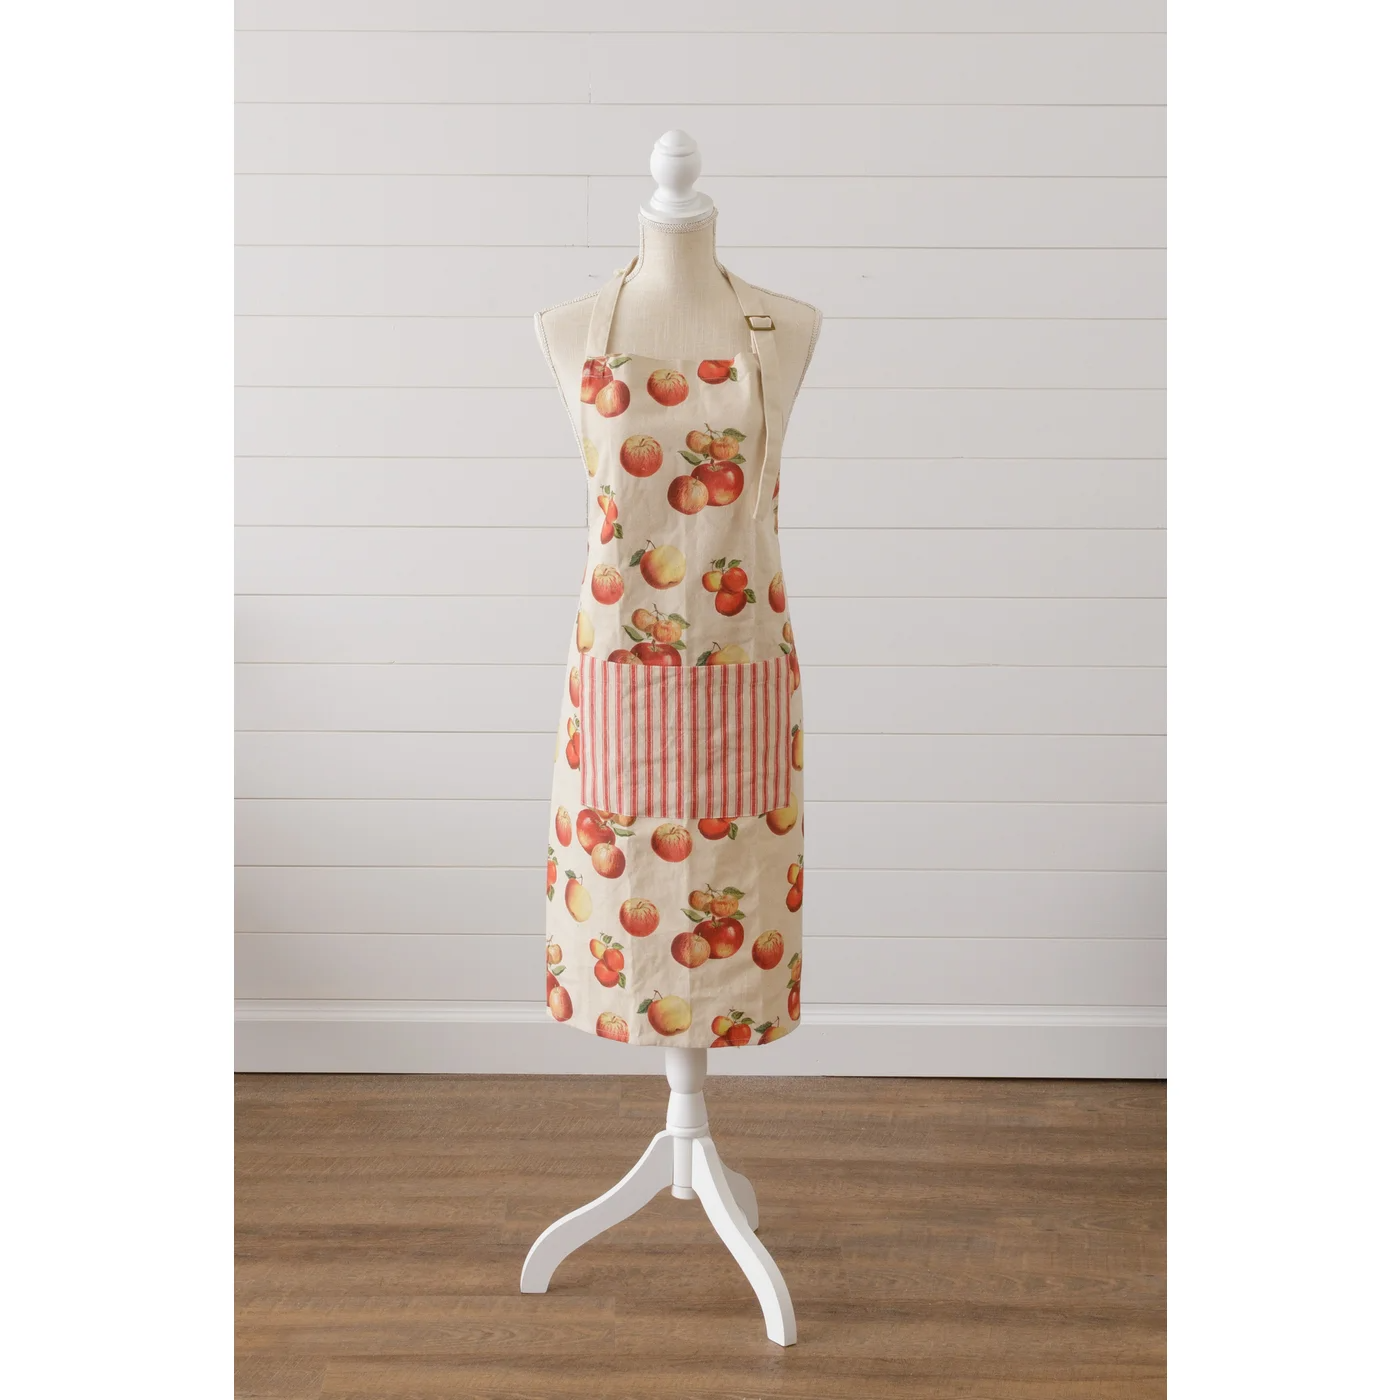 Apples and Striped Pocket Full Length Apron